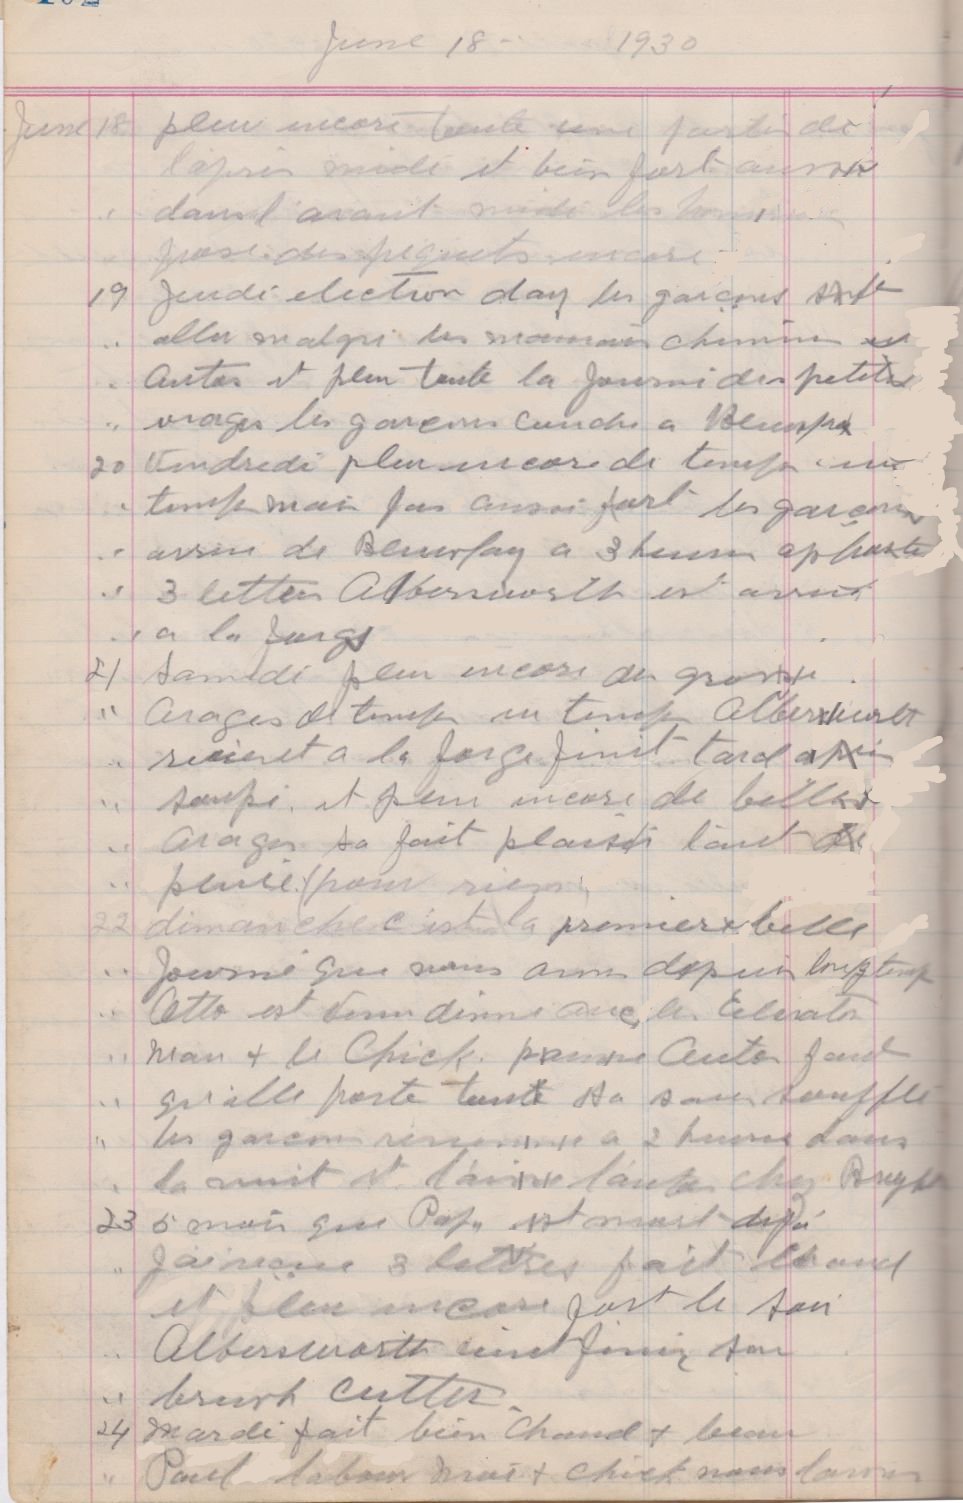 Marie Gregoire Brooks Diary June 18 to 24, 1930